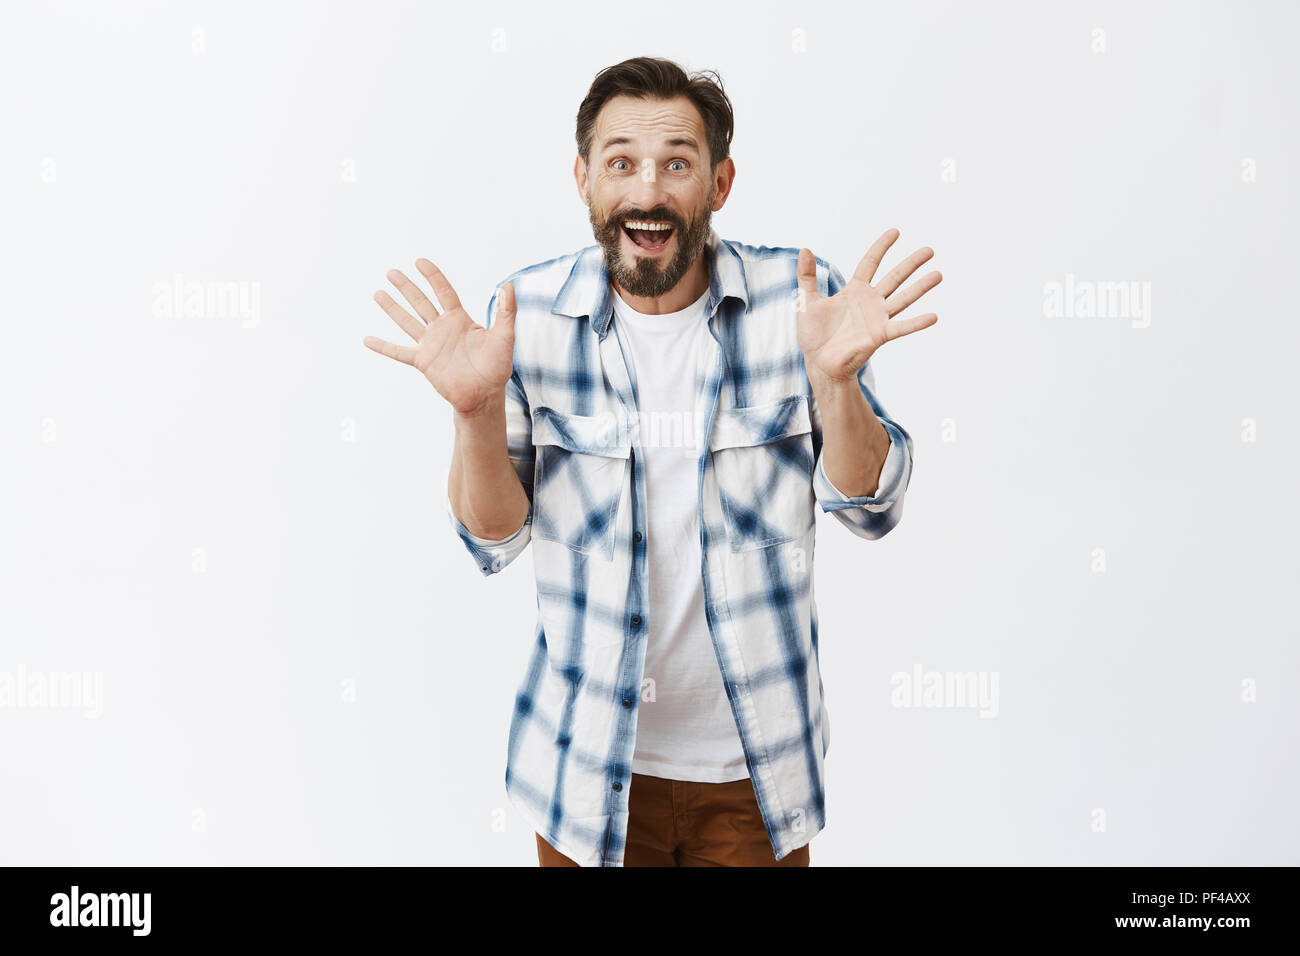 Jazz hands make day happier. Portrait of charming excited joyful european male with beard and moustache, waving raised palms, stooping and smiling joyfully, standing over gray background amused Stock Photo